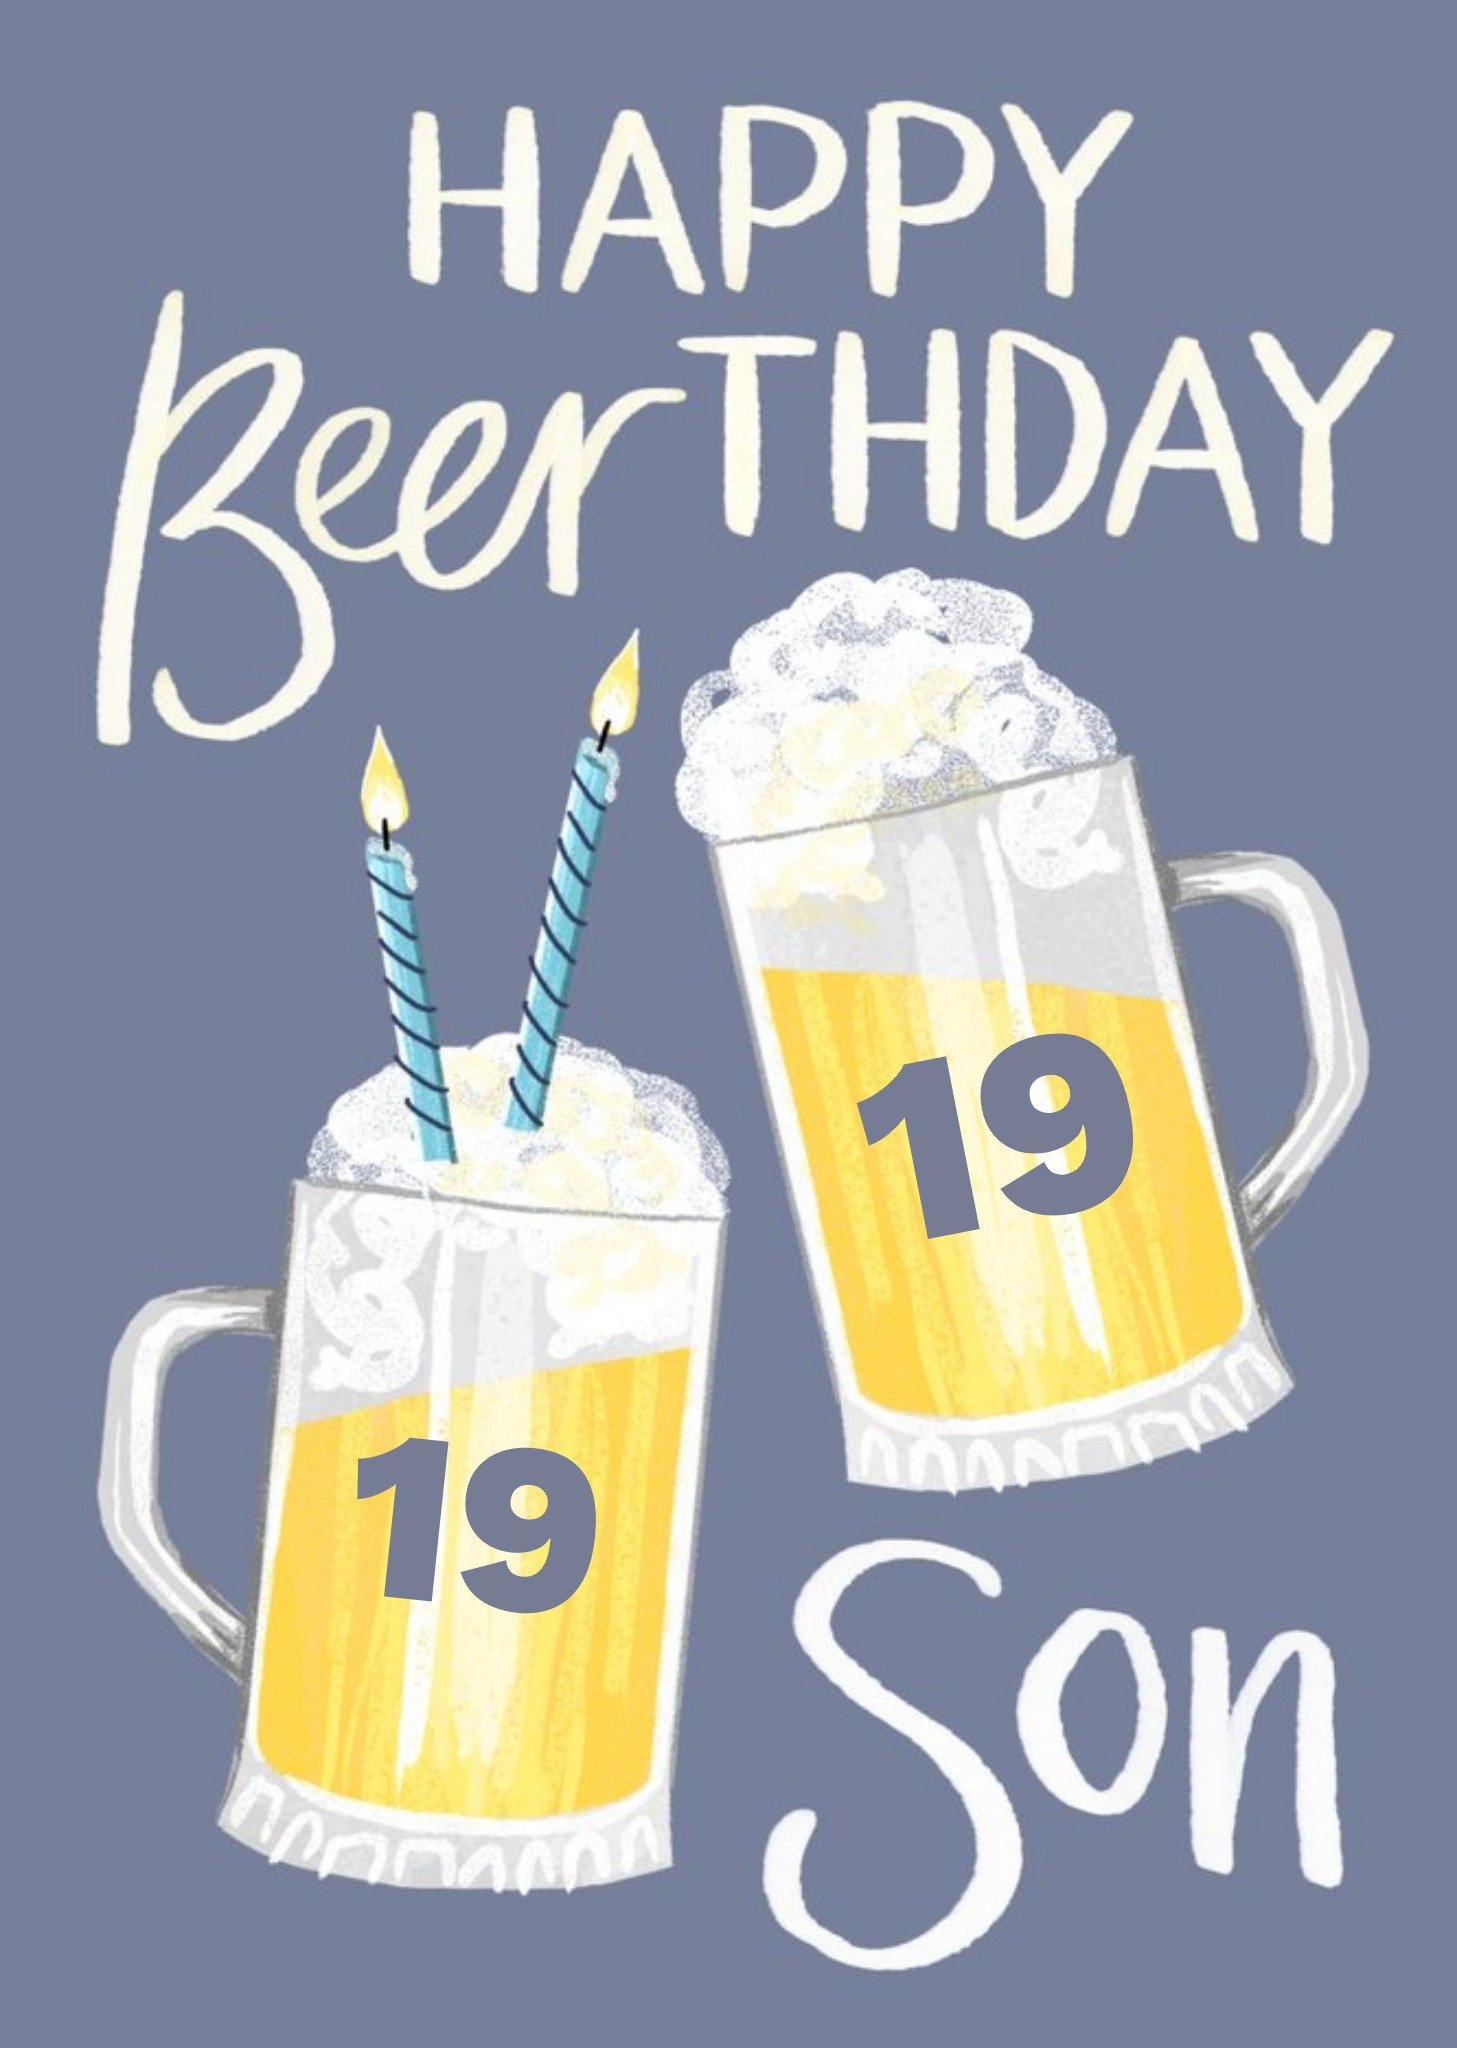 Moonpig Illustrated Beer Drinking themed 19th Birthday Card For Your Son By Okey Dokey Design, Large